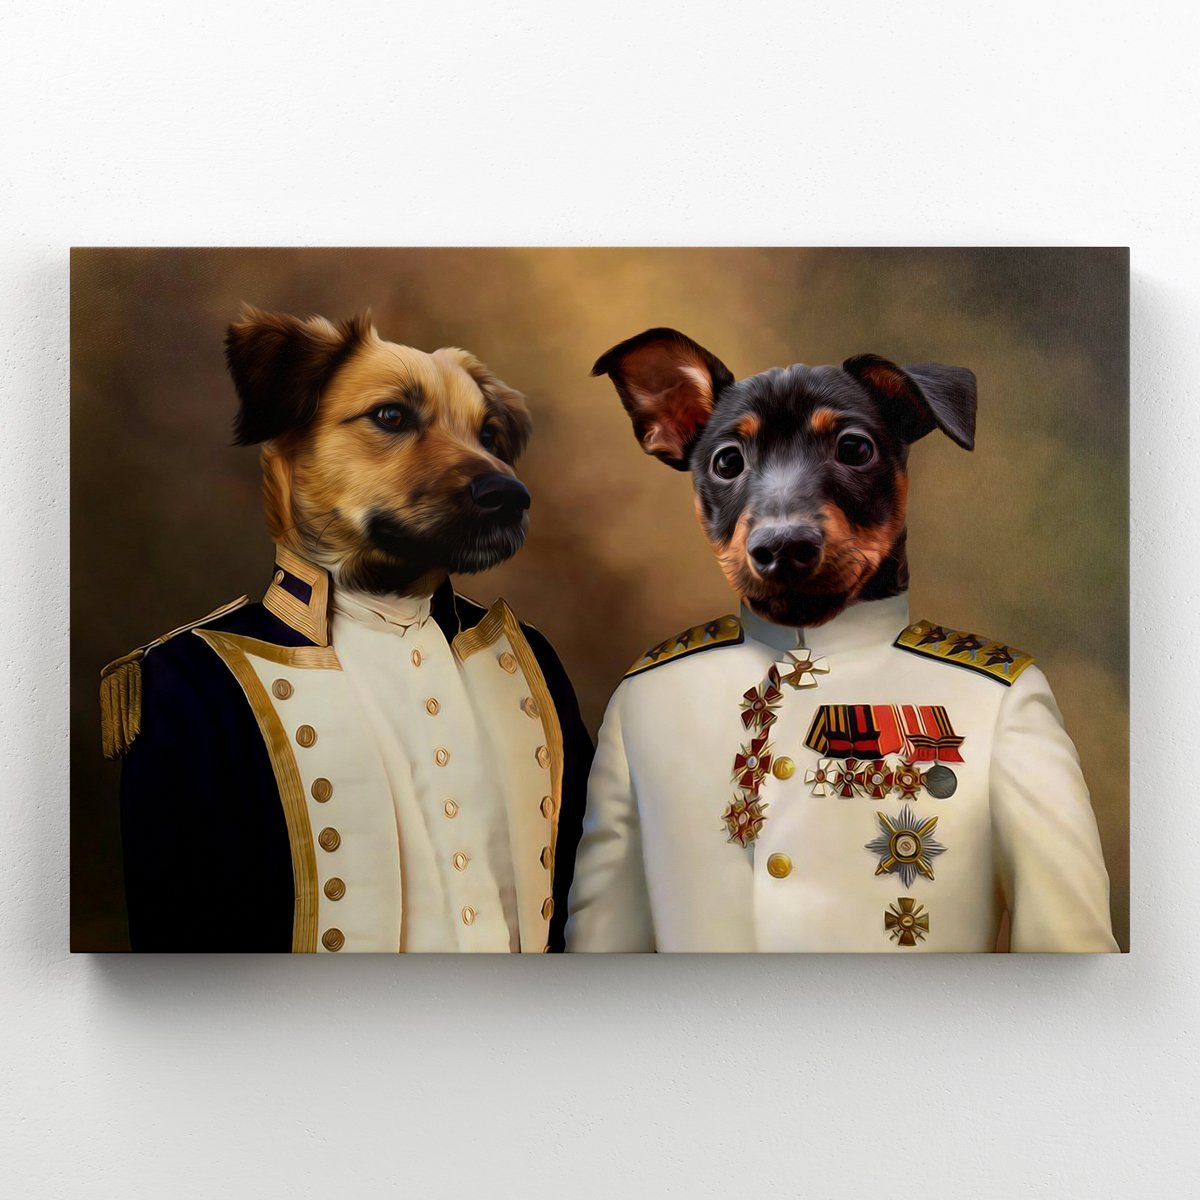 The Admiral & The Sargent: Custom Pet Canvas - Paw & Glory - #pet portraits# - #dog portraits# - #pet portraits uk#paw and glory, pet portraits canvas,dog canvas, personalized dog and owner canvas uk, pet canvas uk, canvas of my dog, dog canvas wall art